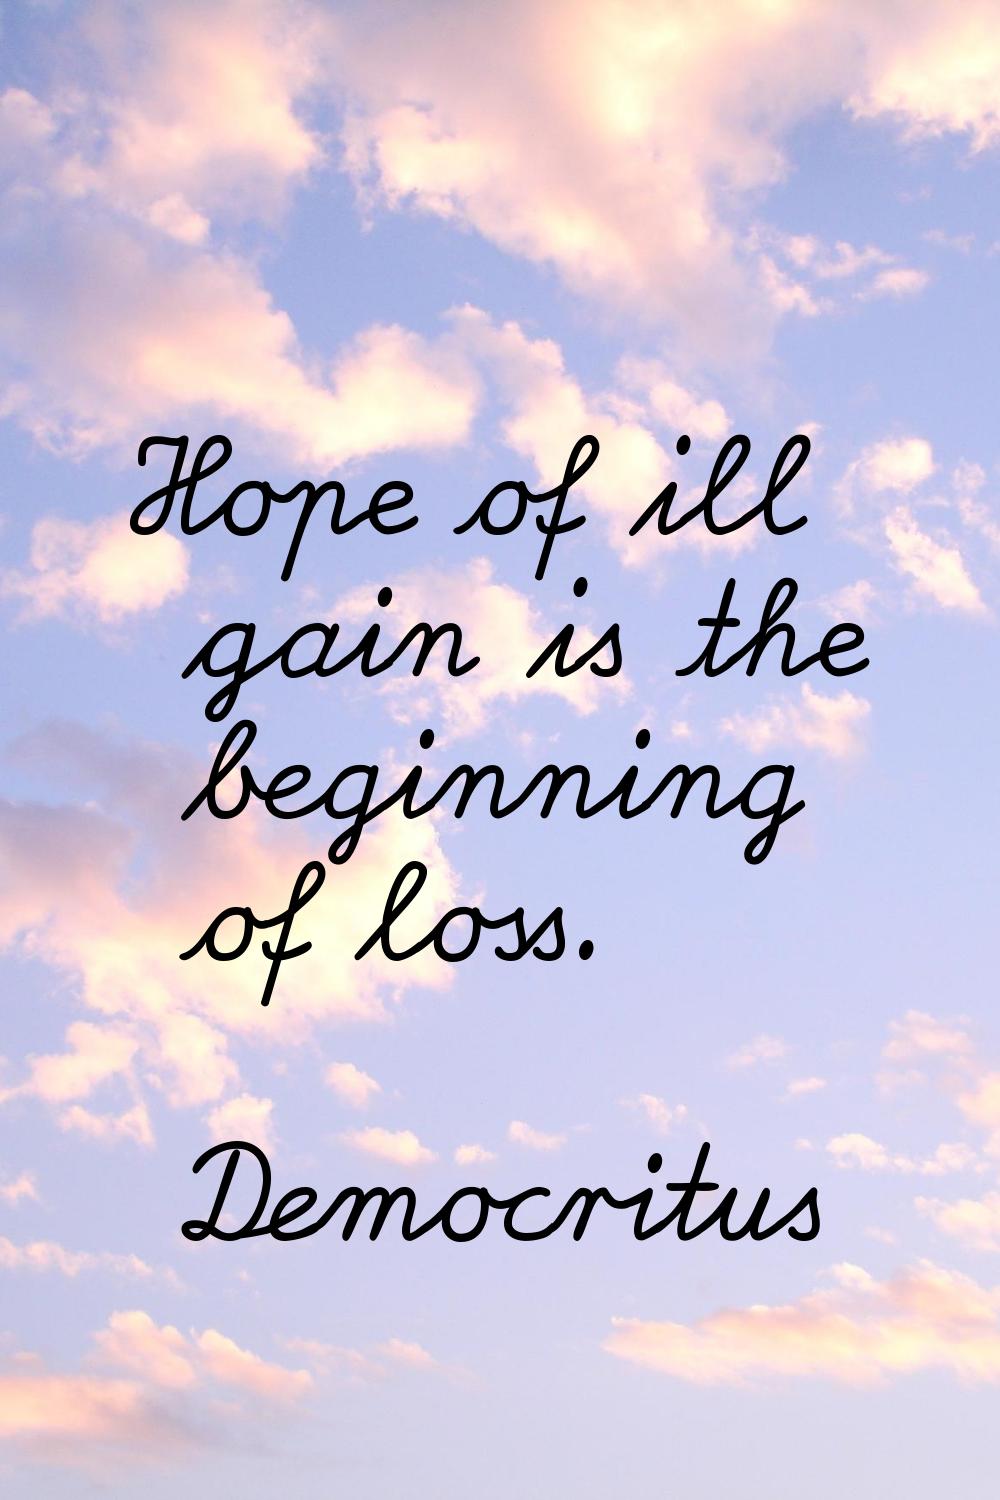 Hope of ill gain is the beginning of loss.